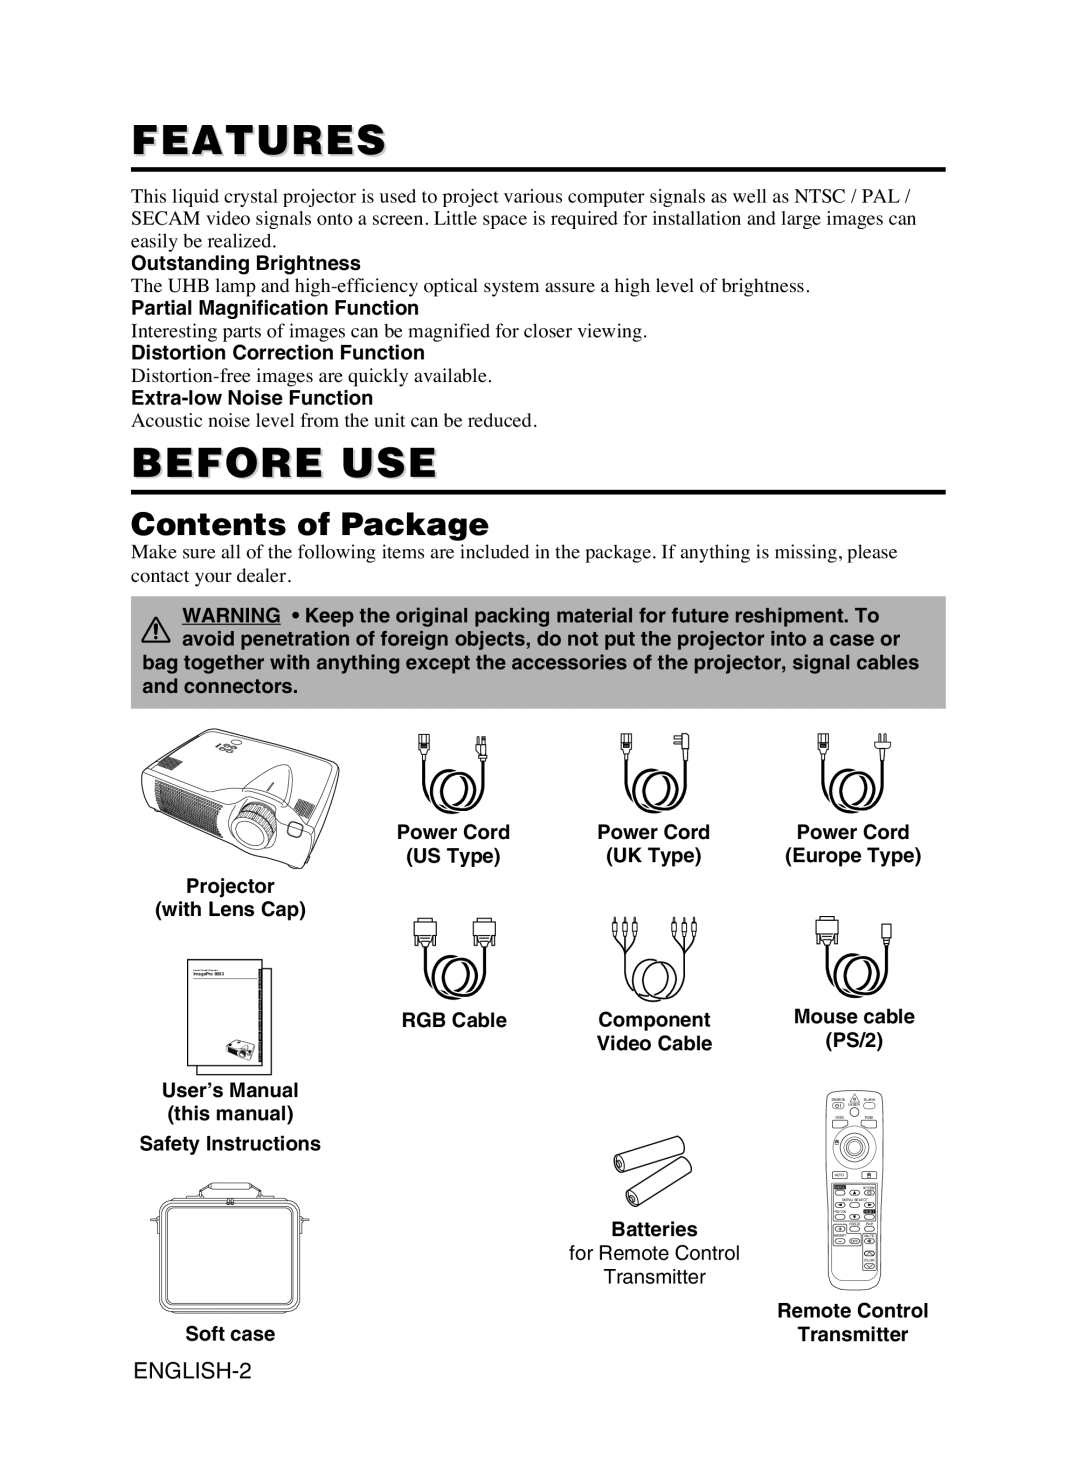 Dukane 8053 user manual Features, Before Use, Contents of Package 